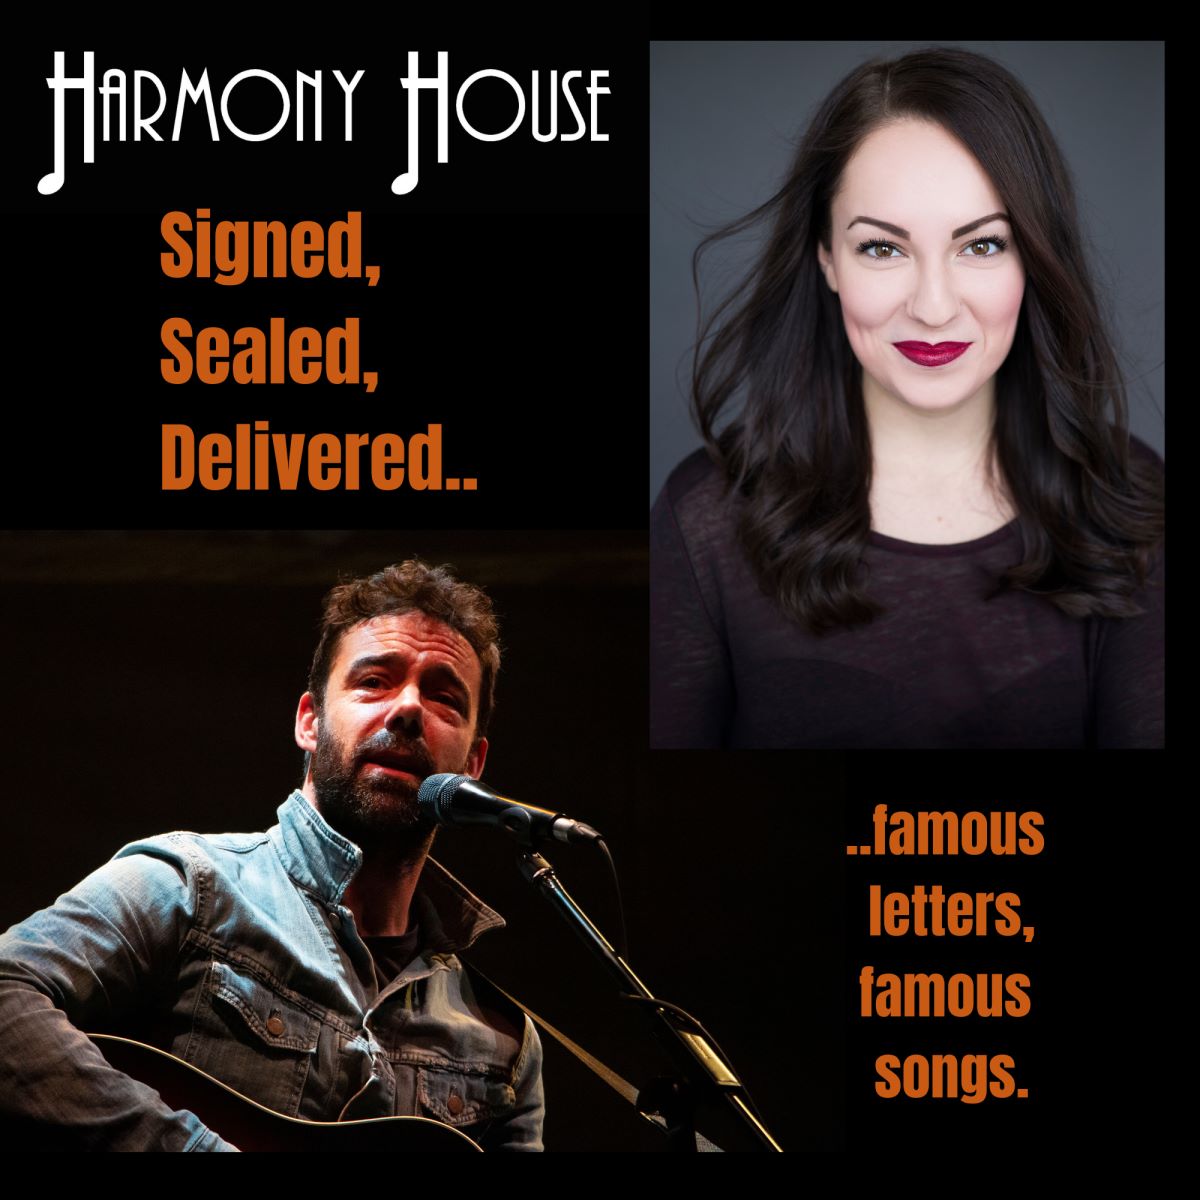 Signed, Sealed, Delivered. famous letters, famous songs